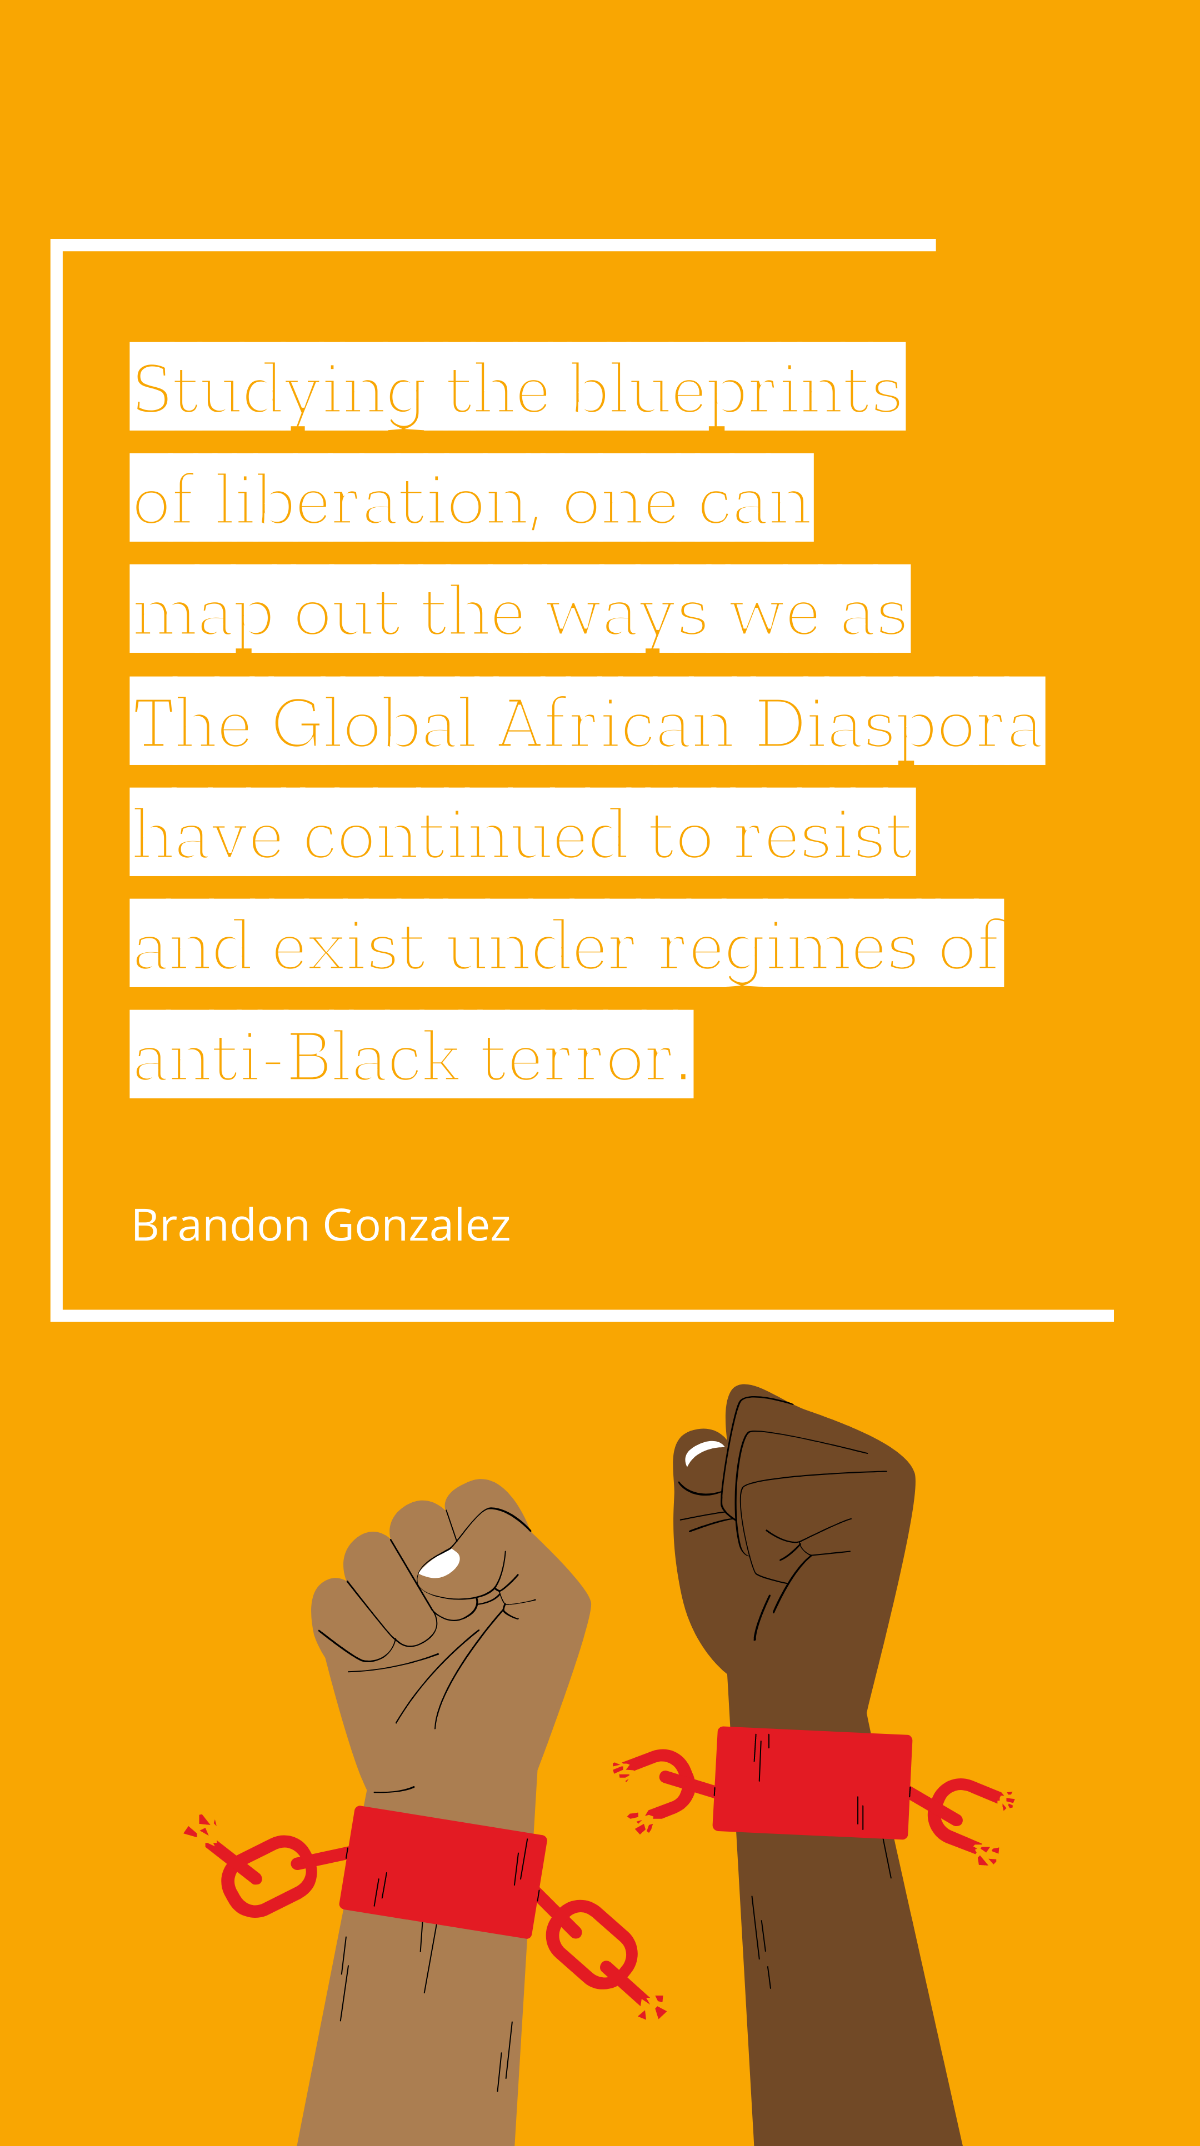 Brandon Gonzalez - Studying the blueprints of liberation, one can map out the ways we as The Global African Diaspora have continued to resist and exist under regimes of anti-Black terror.